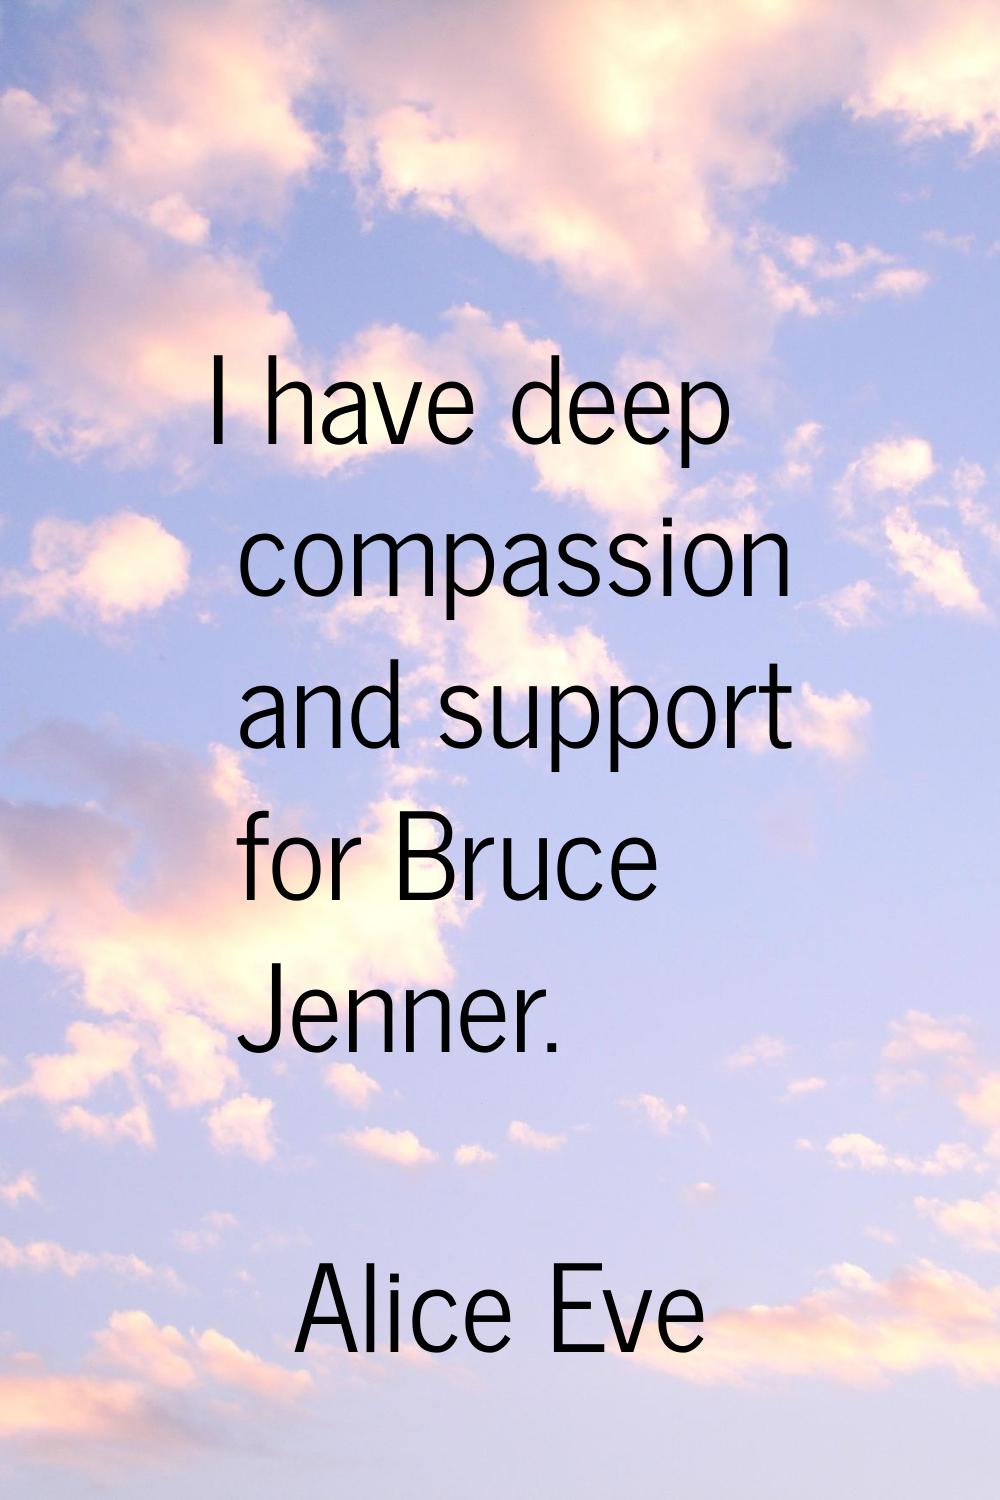 I have deep compassion and support for Bruce Jenner.